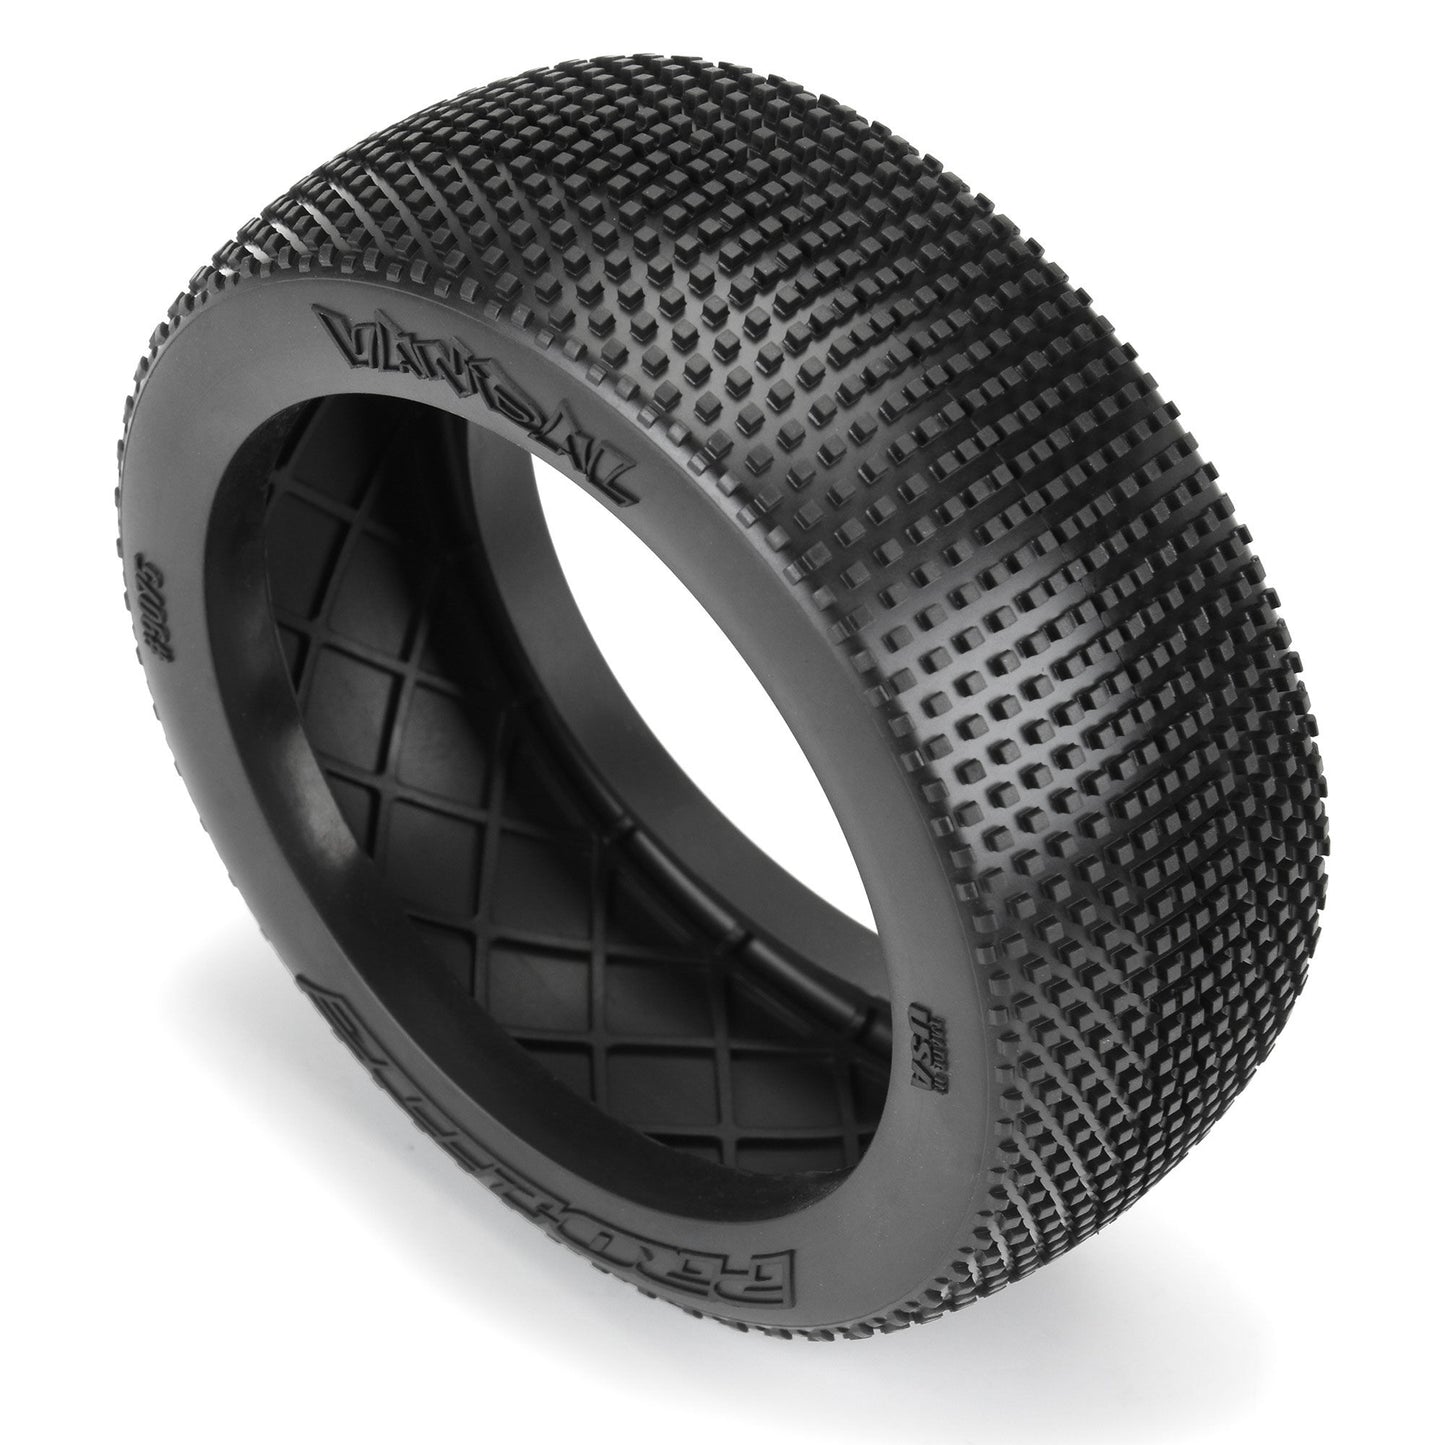 Pro-Line Racing PRO9075204 1:8 Vandal S4 F/R Off-Road Buggy Tires (Pack of 2)